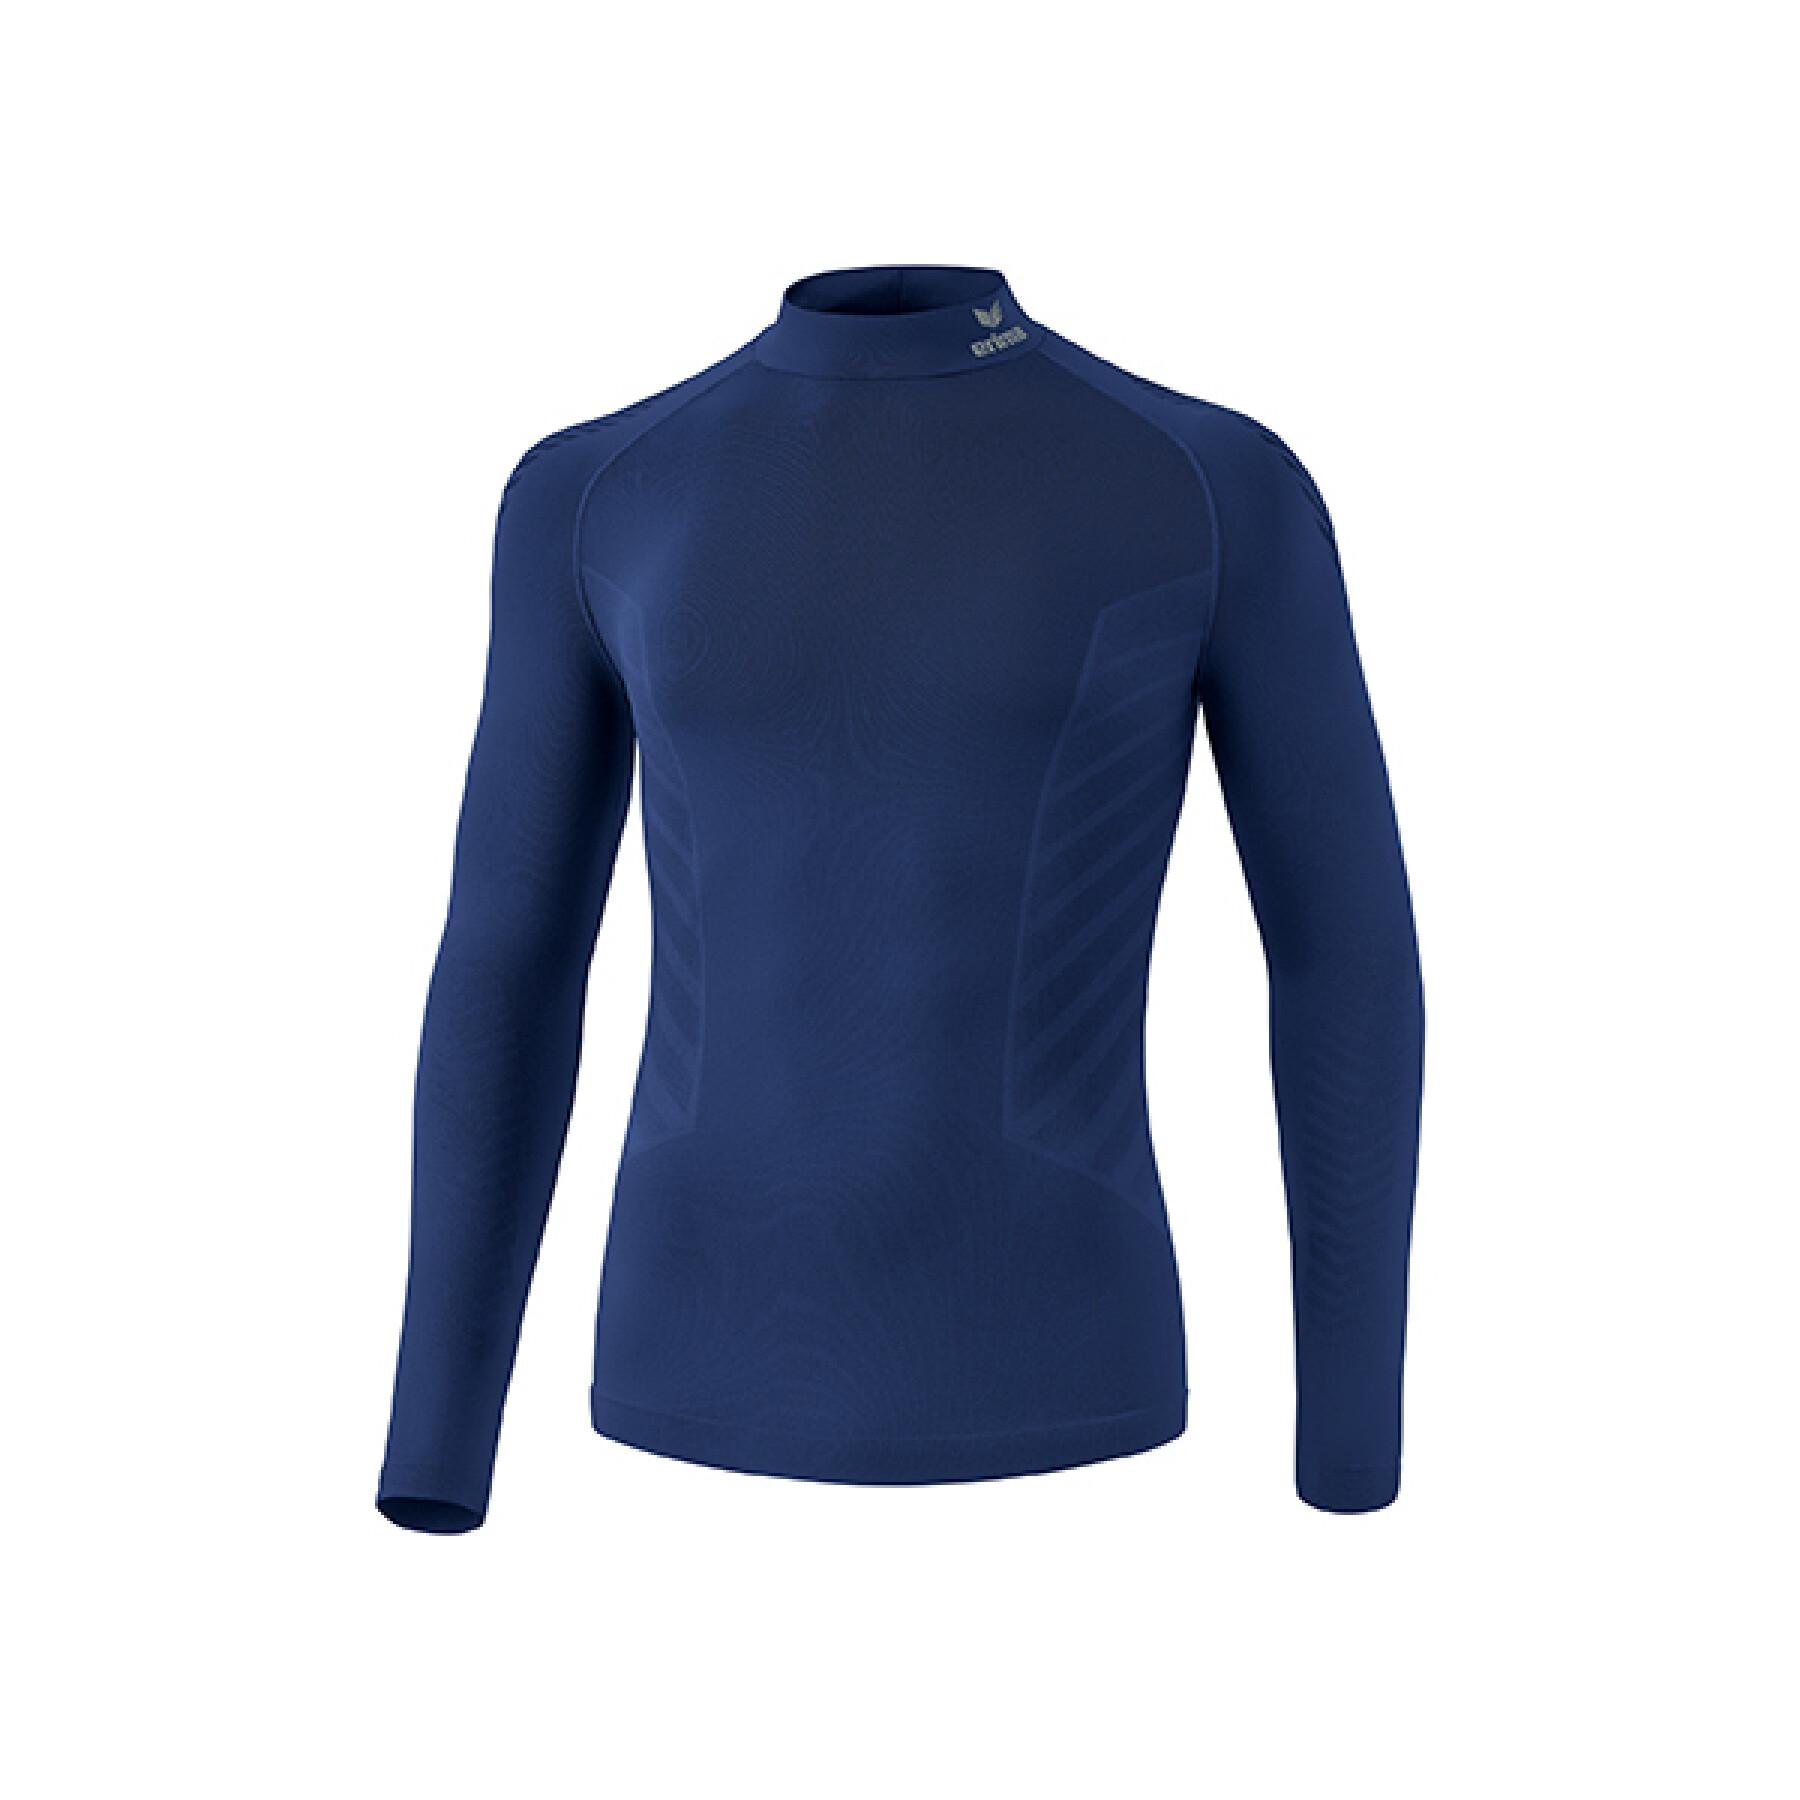 Long sleeve compression jersey with high neck Erima Athletic - Shirts -  Textile - Volleyball wear